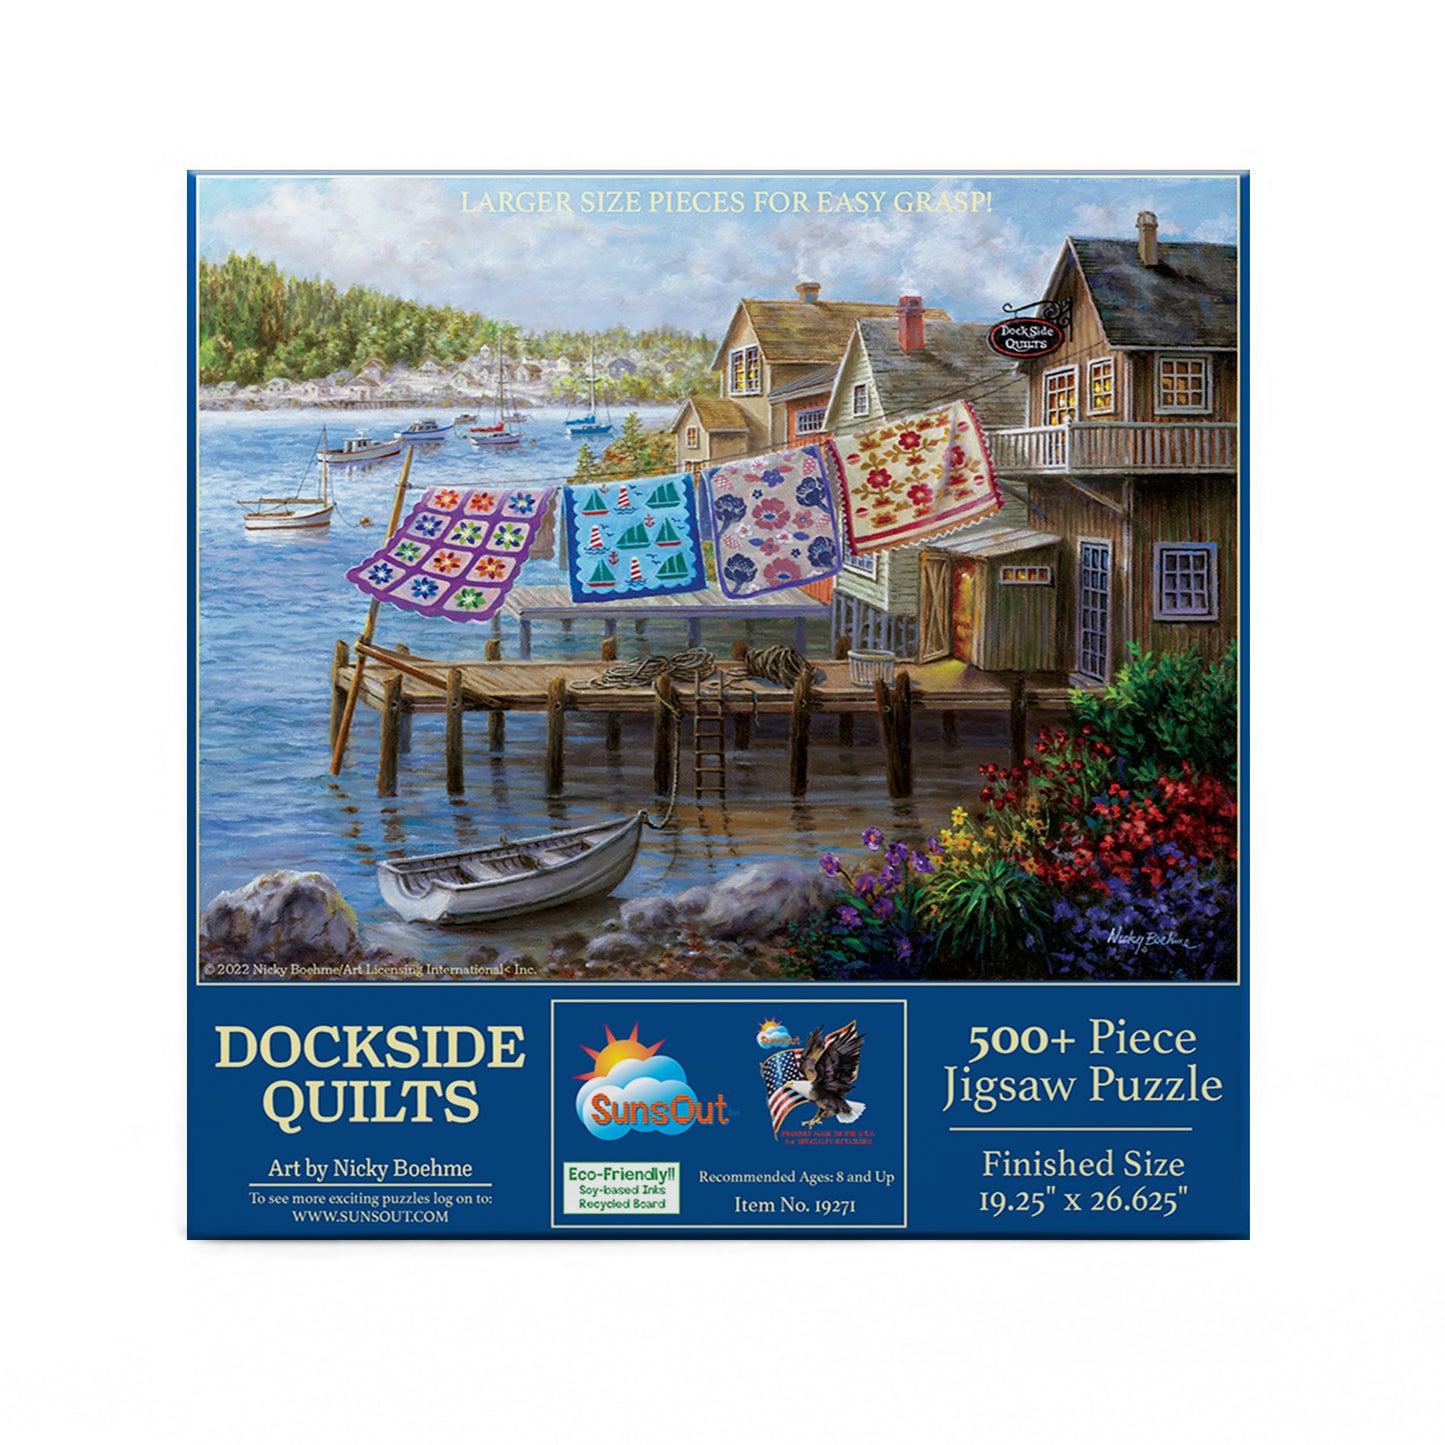 Dockside Quilts - 500 Large Piece Jigsaw Puzzle